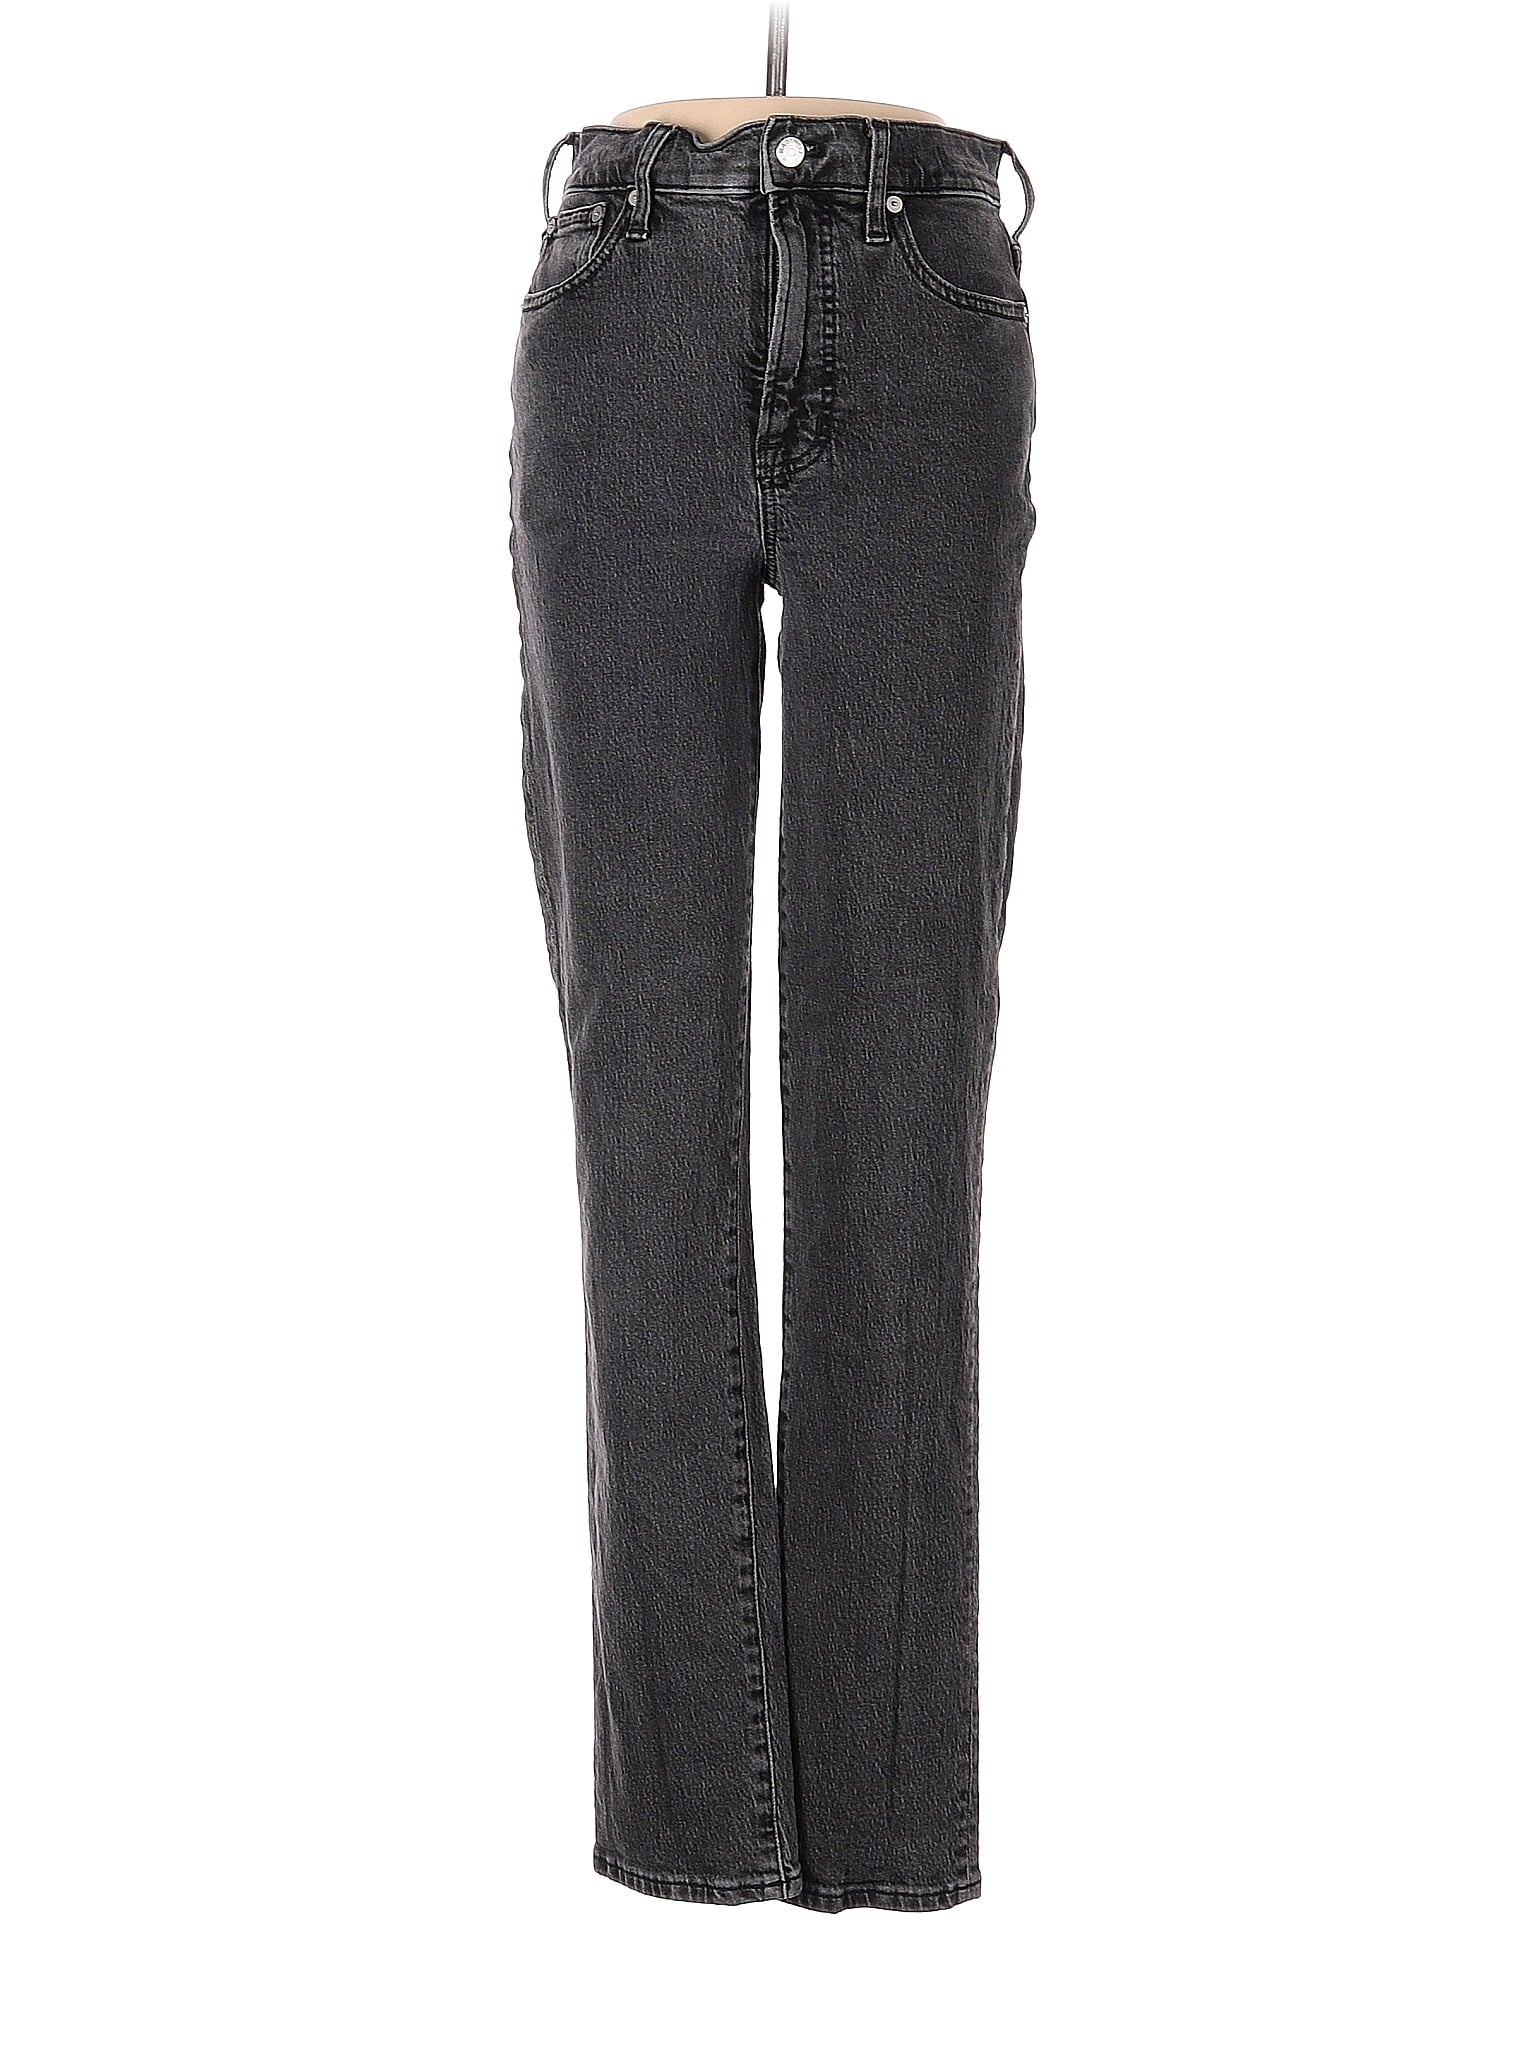 High-Rise Boyjeans The Tall Perfect Vintage Jean In Lunar Wash in Dark Wash waist size - 26 T